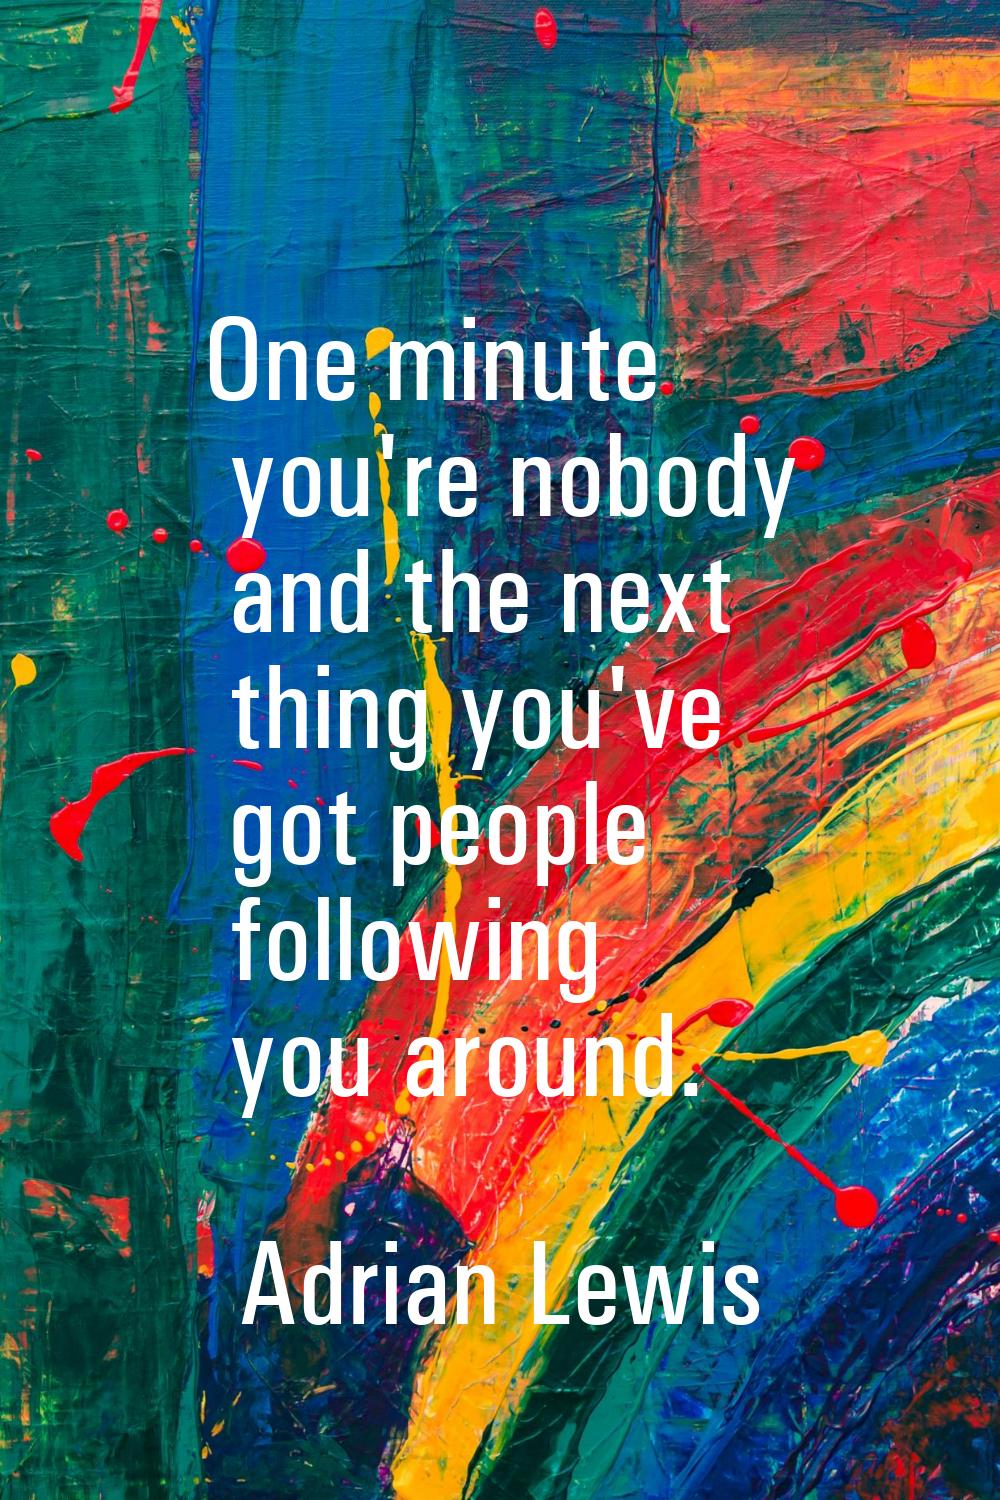 One minute you're nobody and the next thing you've got people following you around.